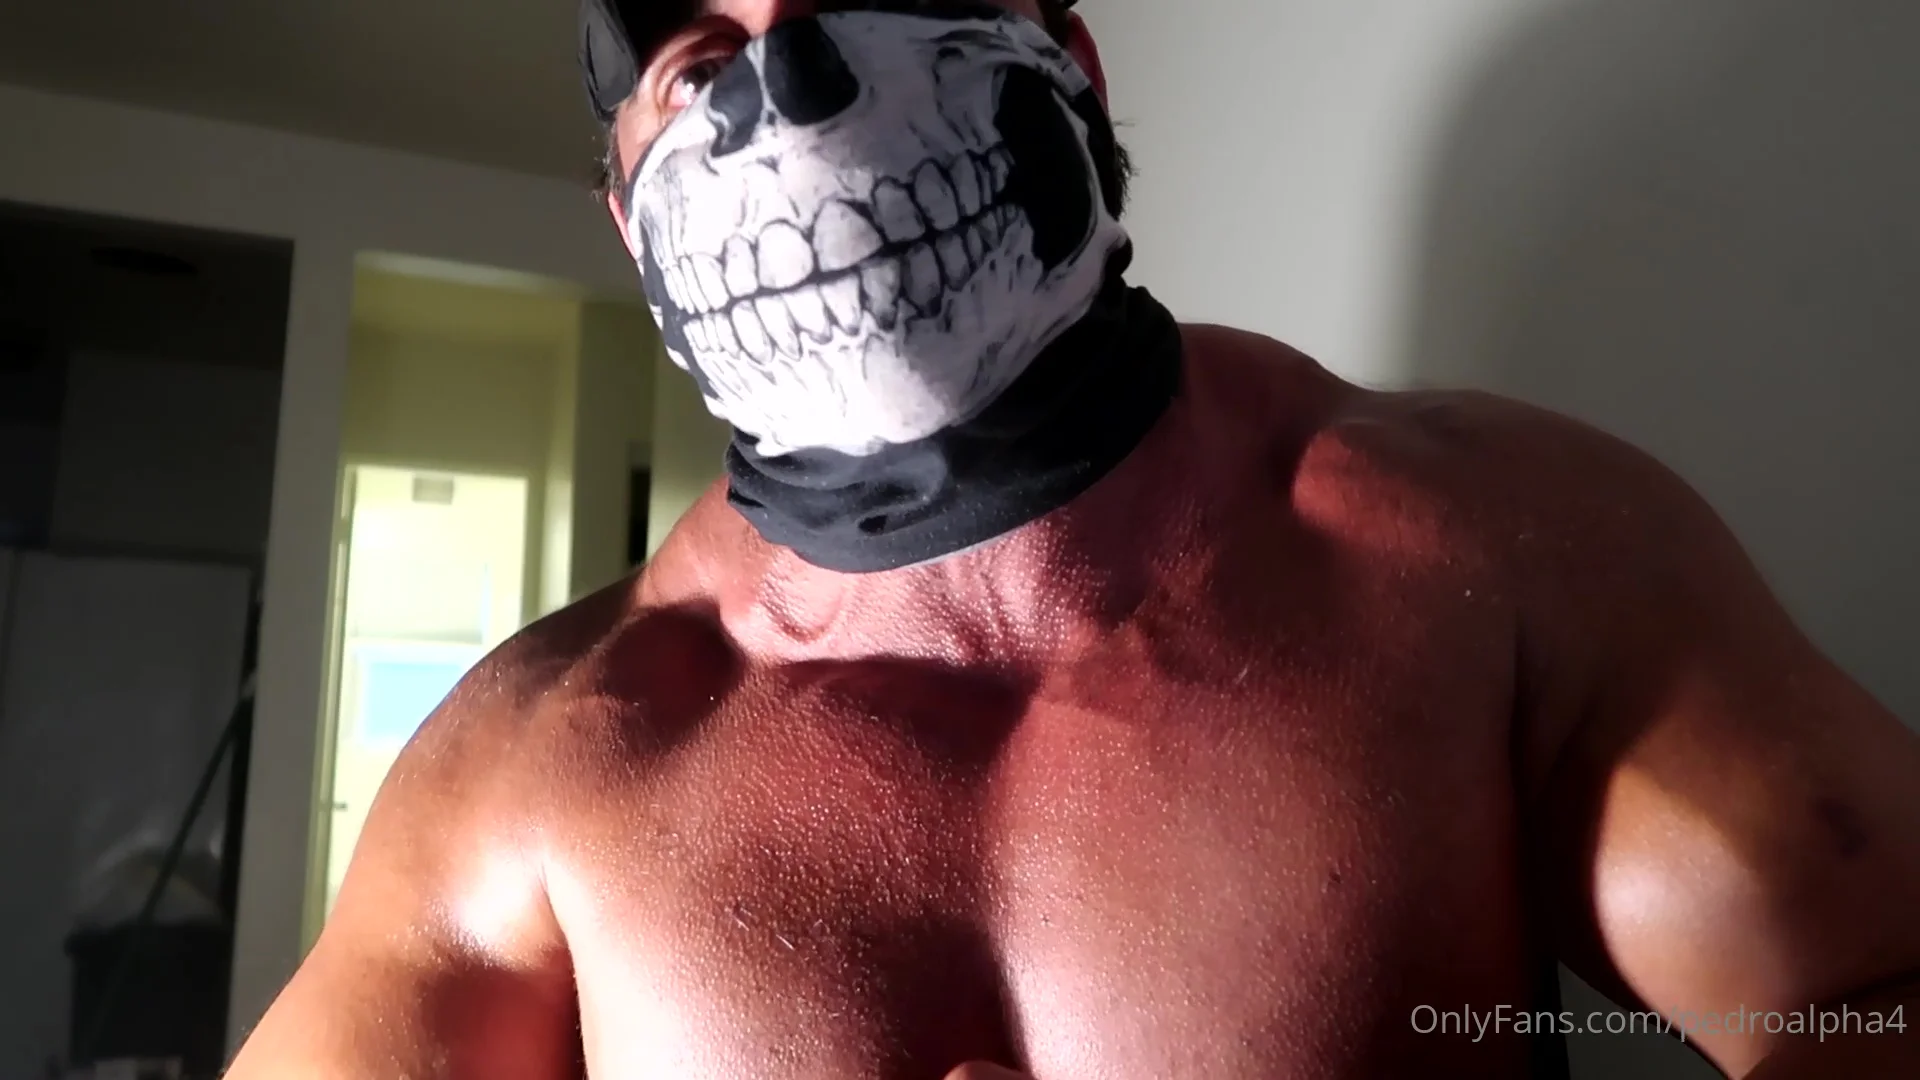 Yes Pro Please Com - Yes please: Big Masked Daddy Flexing - ThisVid.com